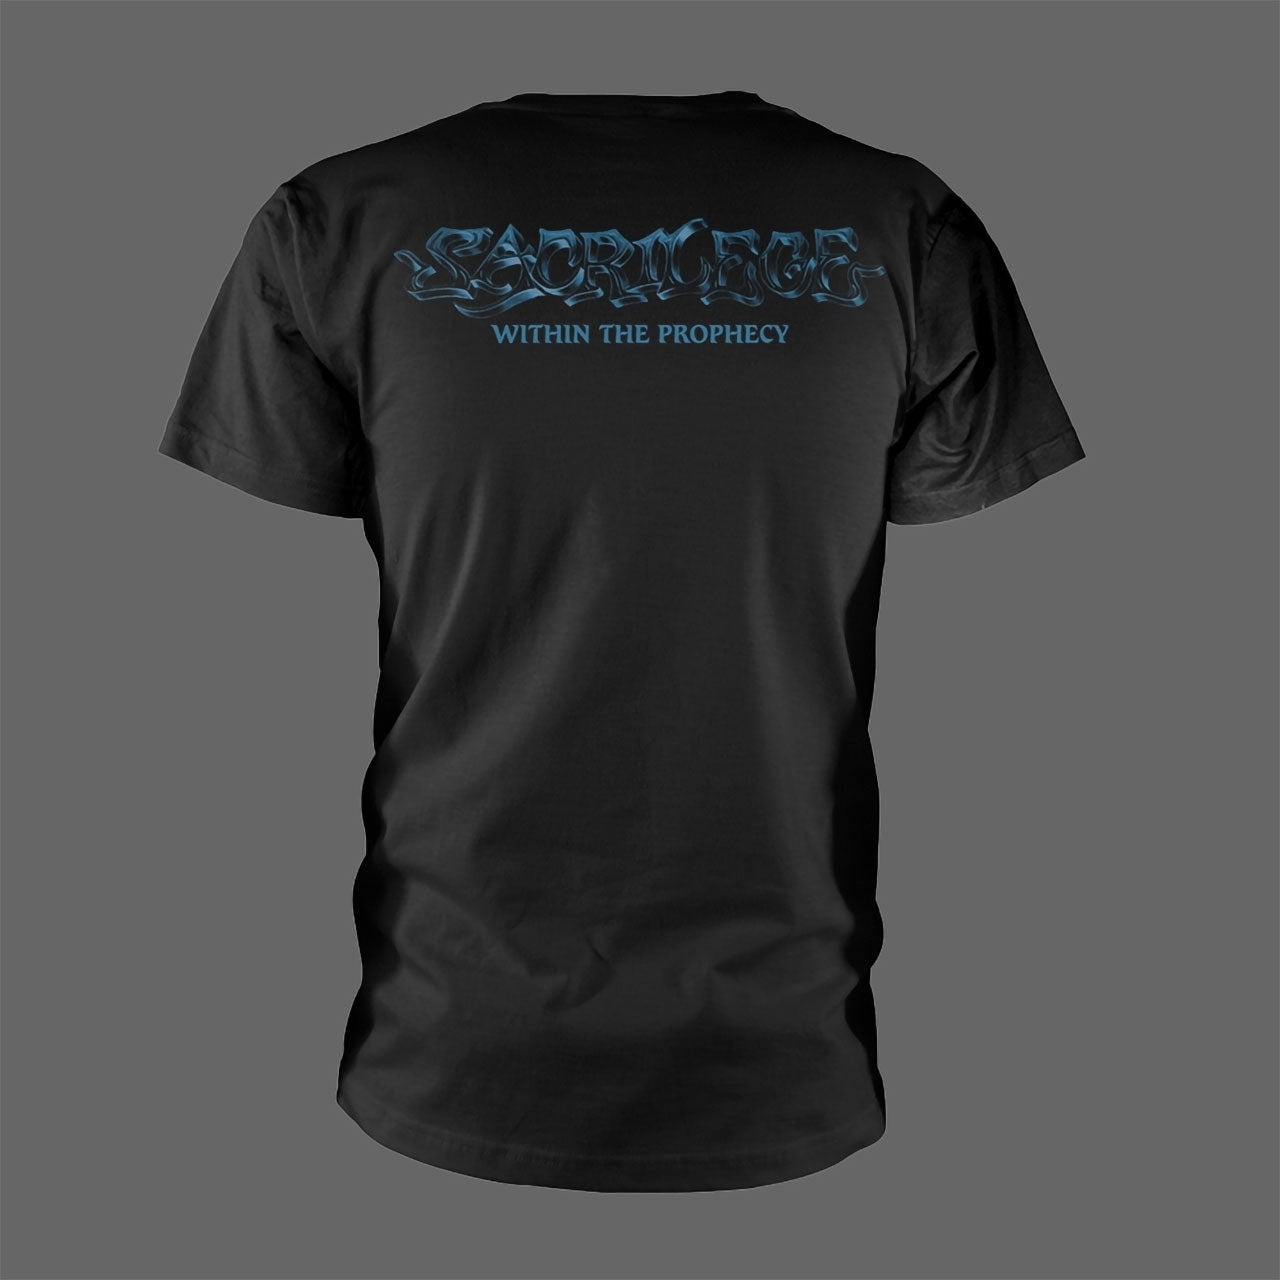 Sacrilege - Within the Prophecy (T-Shirt)